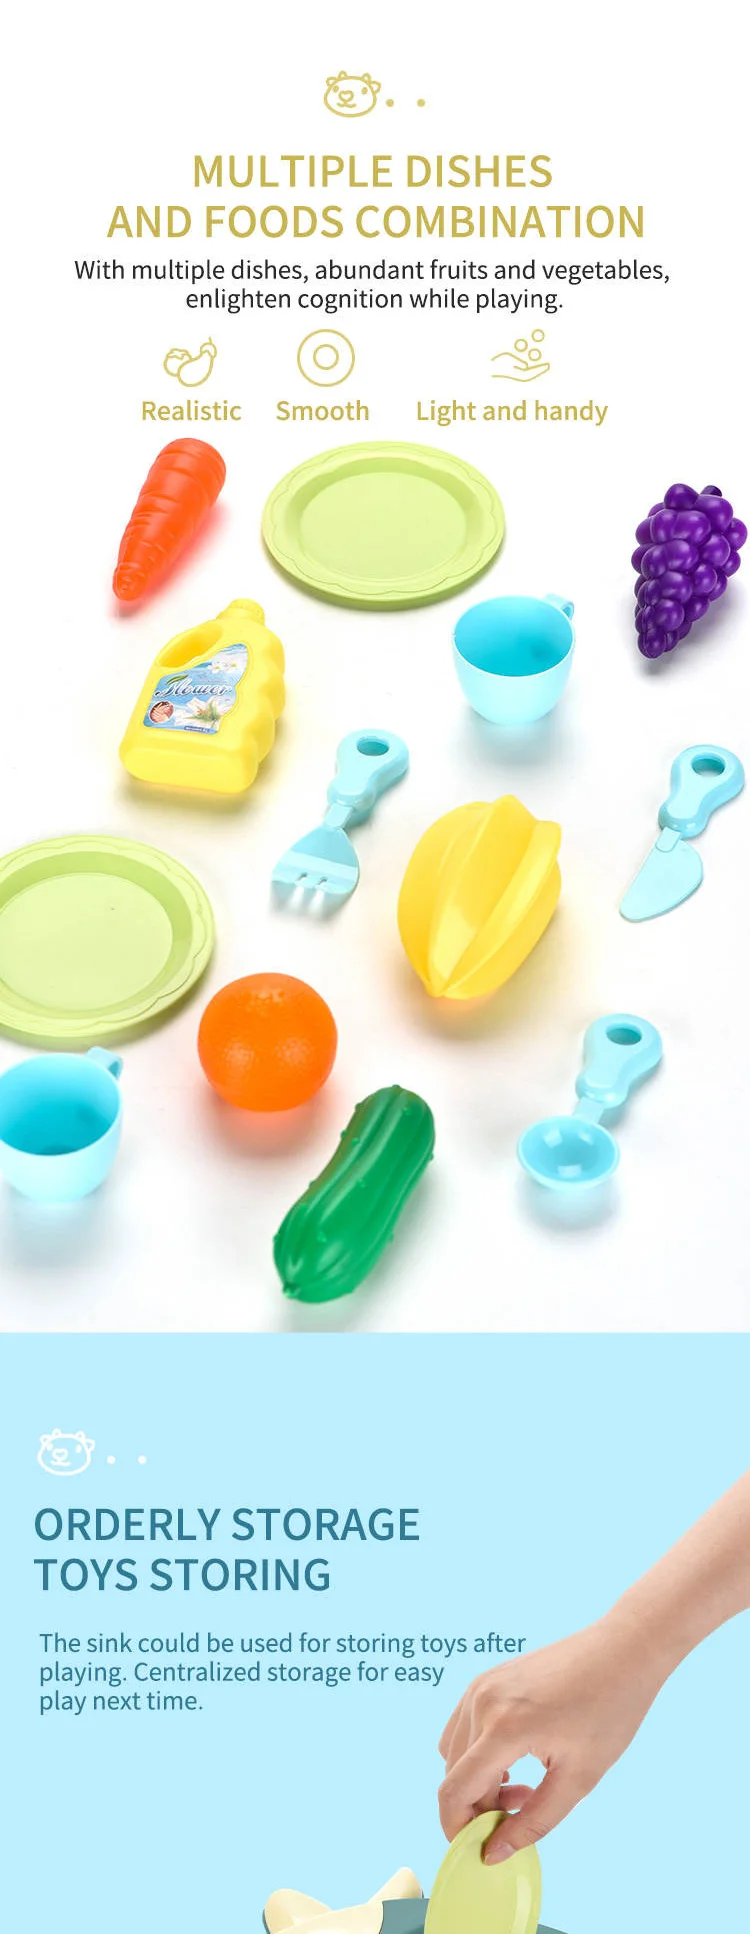 Kids Kitchen Sink Toys Simulation Electric Dishwasher Mini Kitchen Food Pretend Play House Toy Set Children Role Play Girl Toys